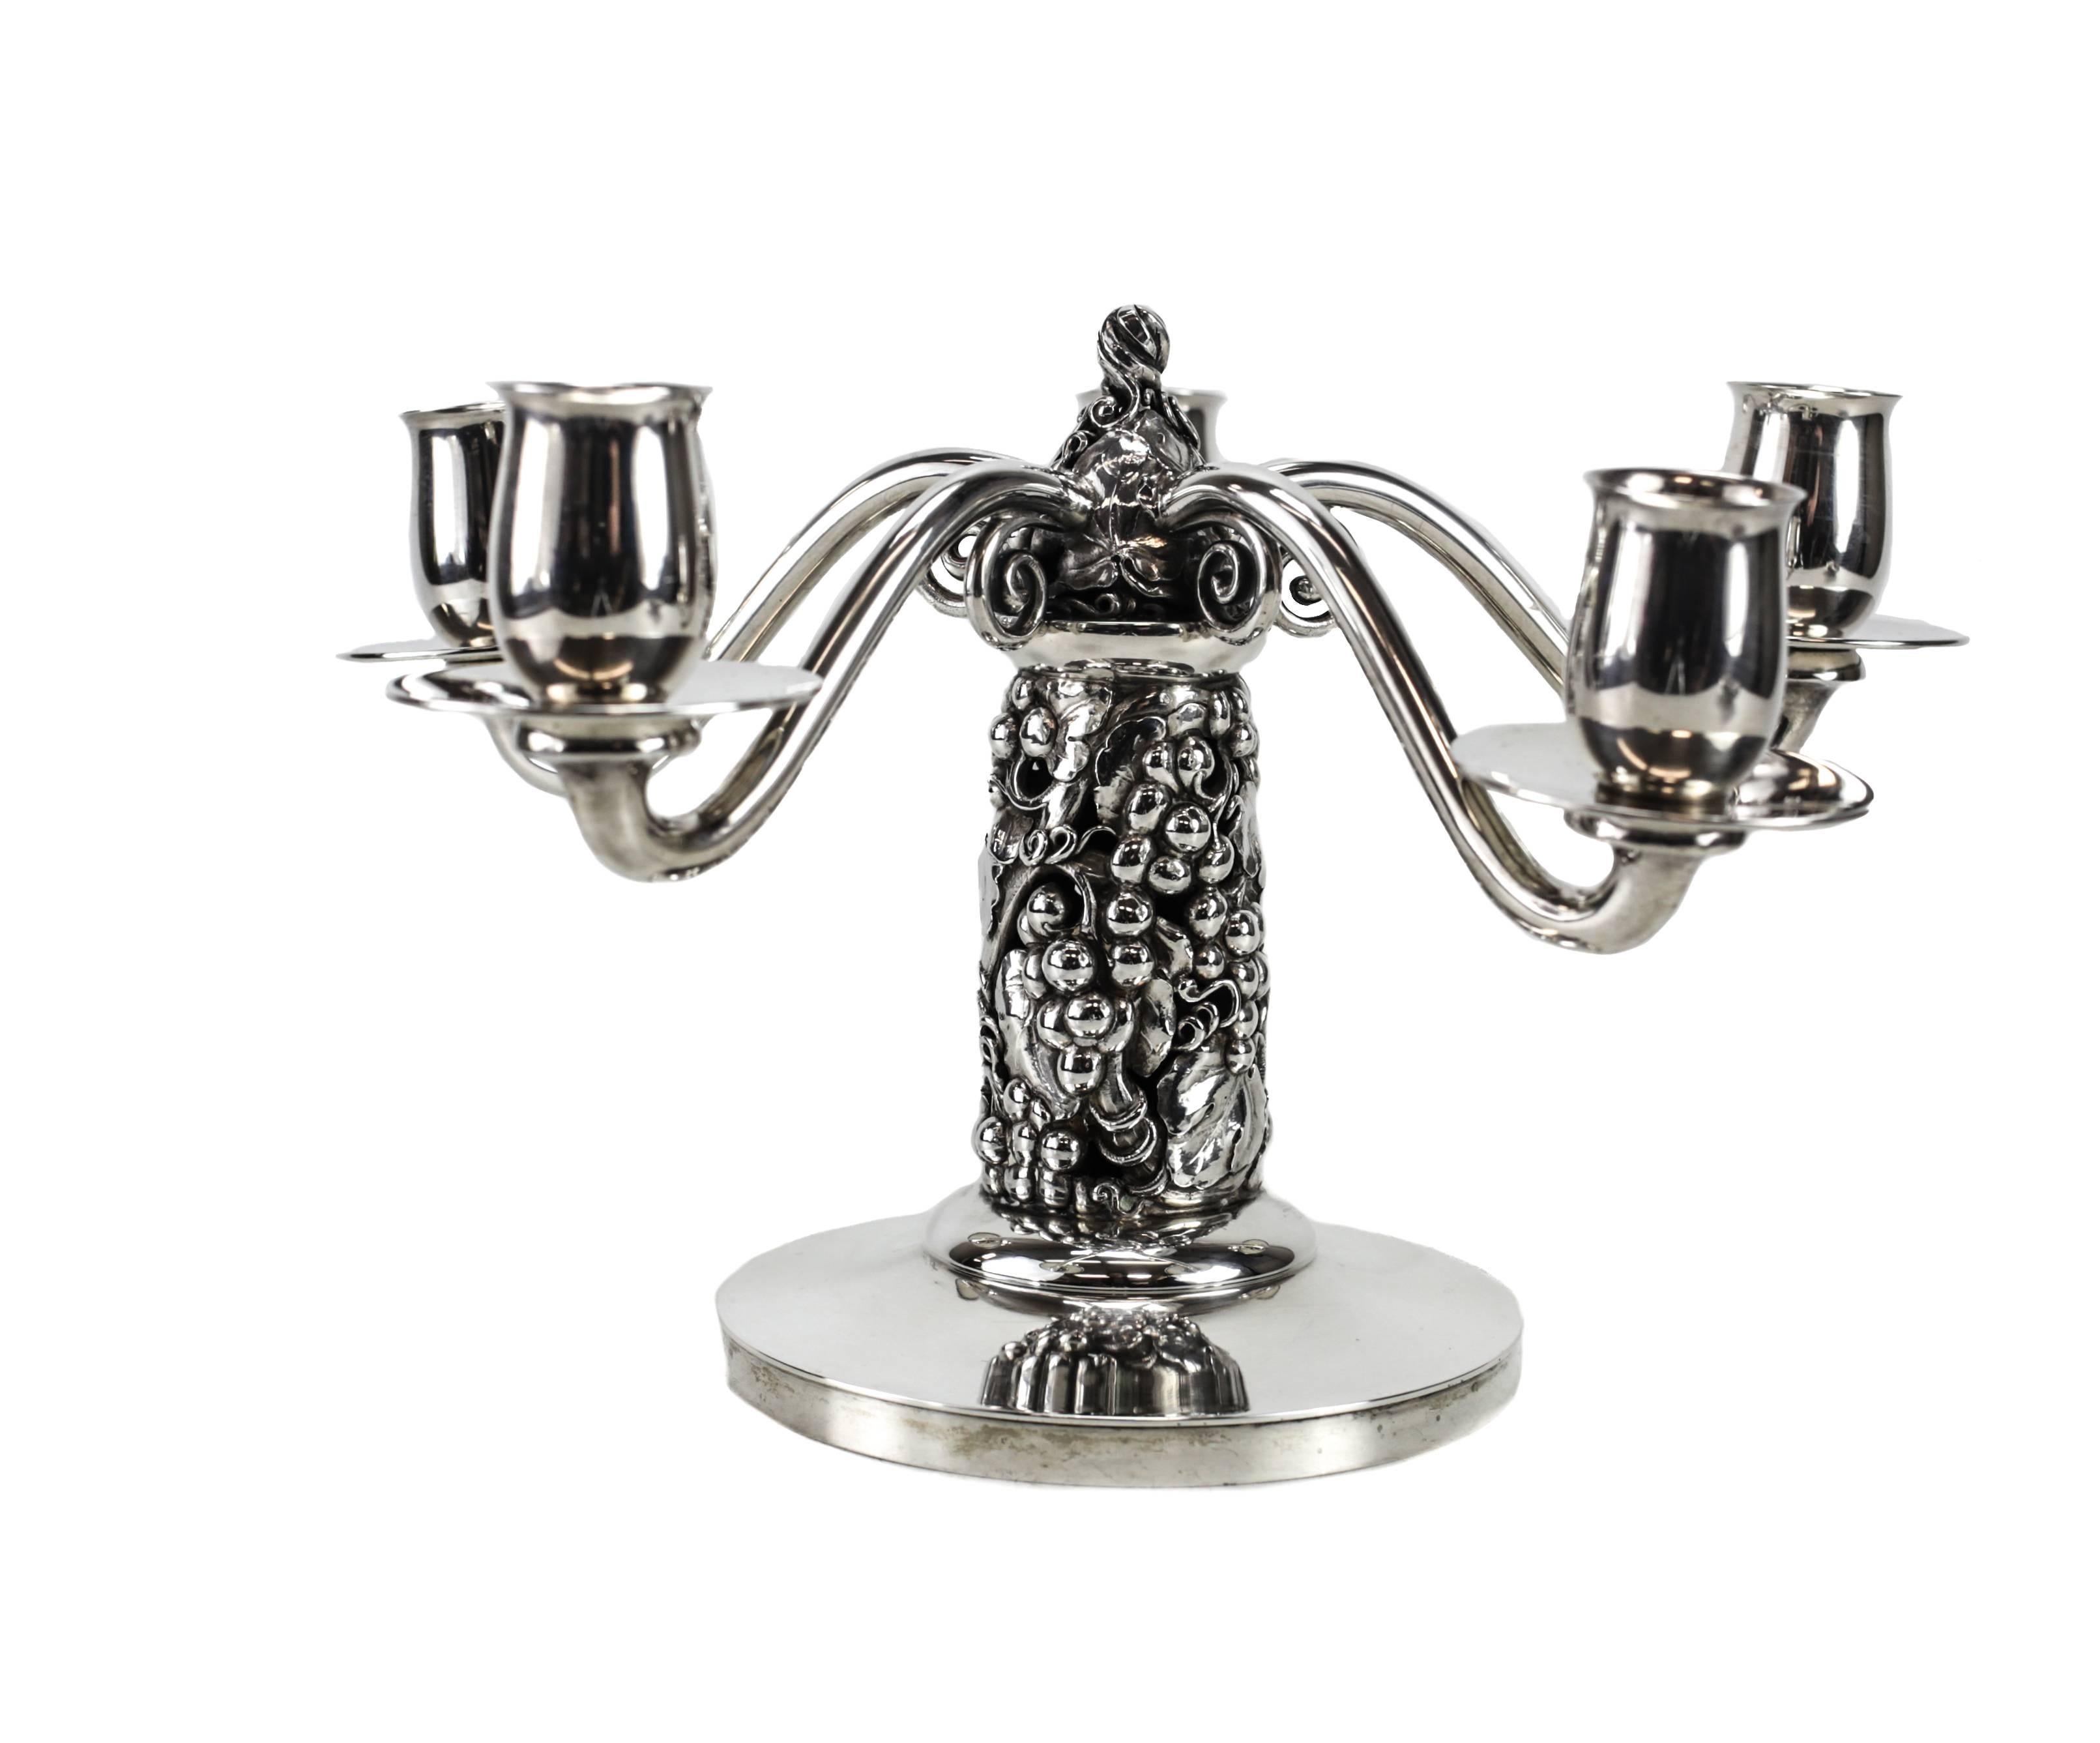 A sterling silver candelabra, beautifully executed in a fruiting grape vine motif with five arms, designed by Johannes Siggard and executed by Evald Nielsen. 

Impressed marks include:
Three tower mark indicating sterling silver, with 34 for